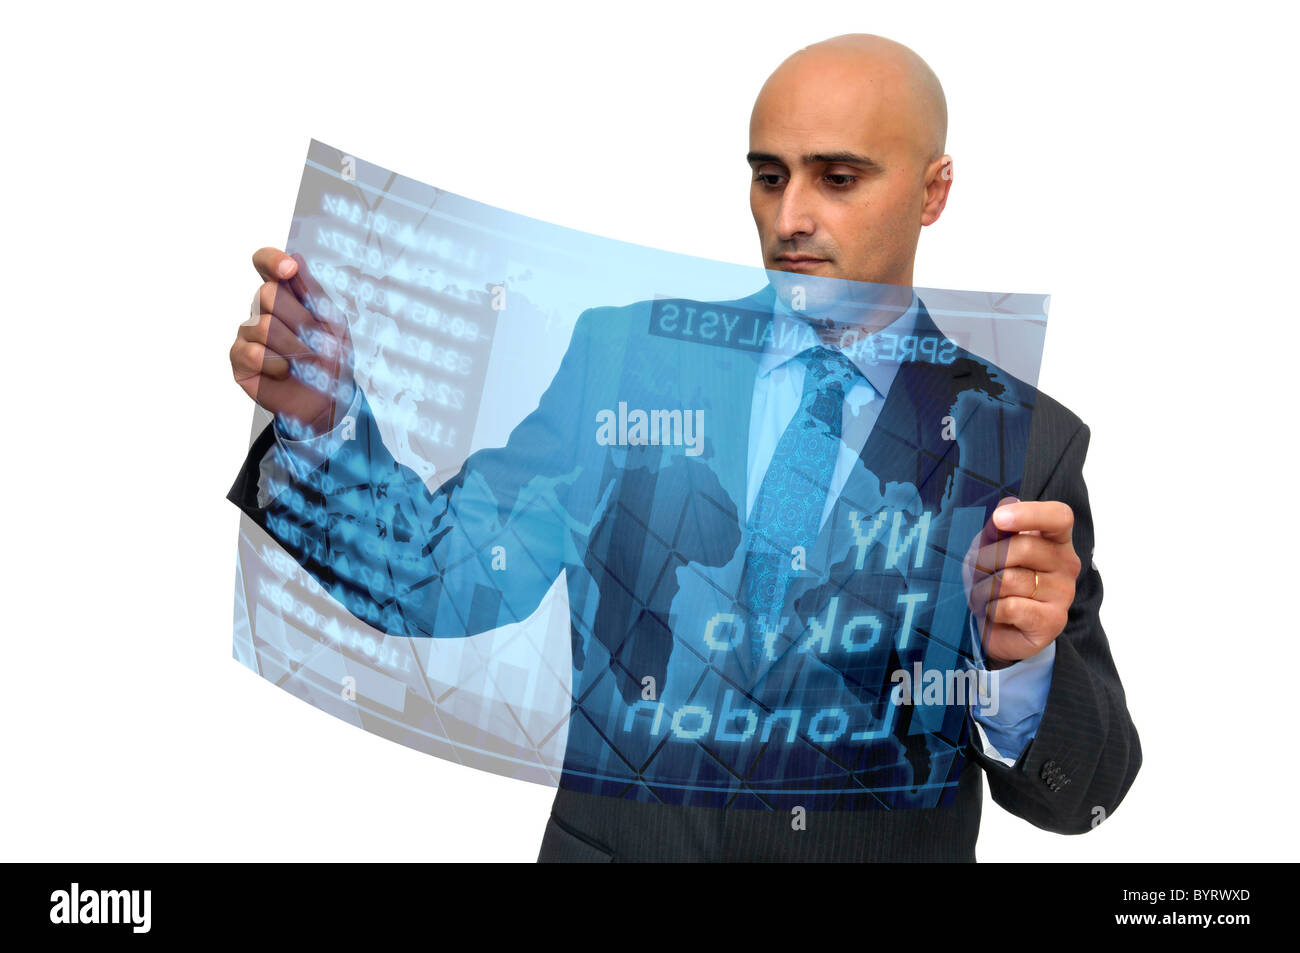 Businessman with high tech stock exchange newspaper Stock Photo